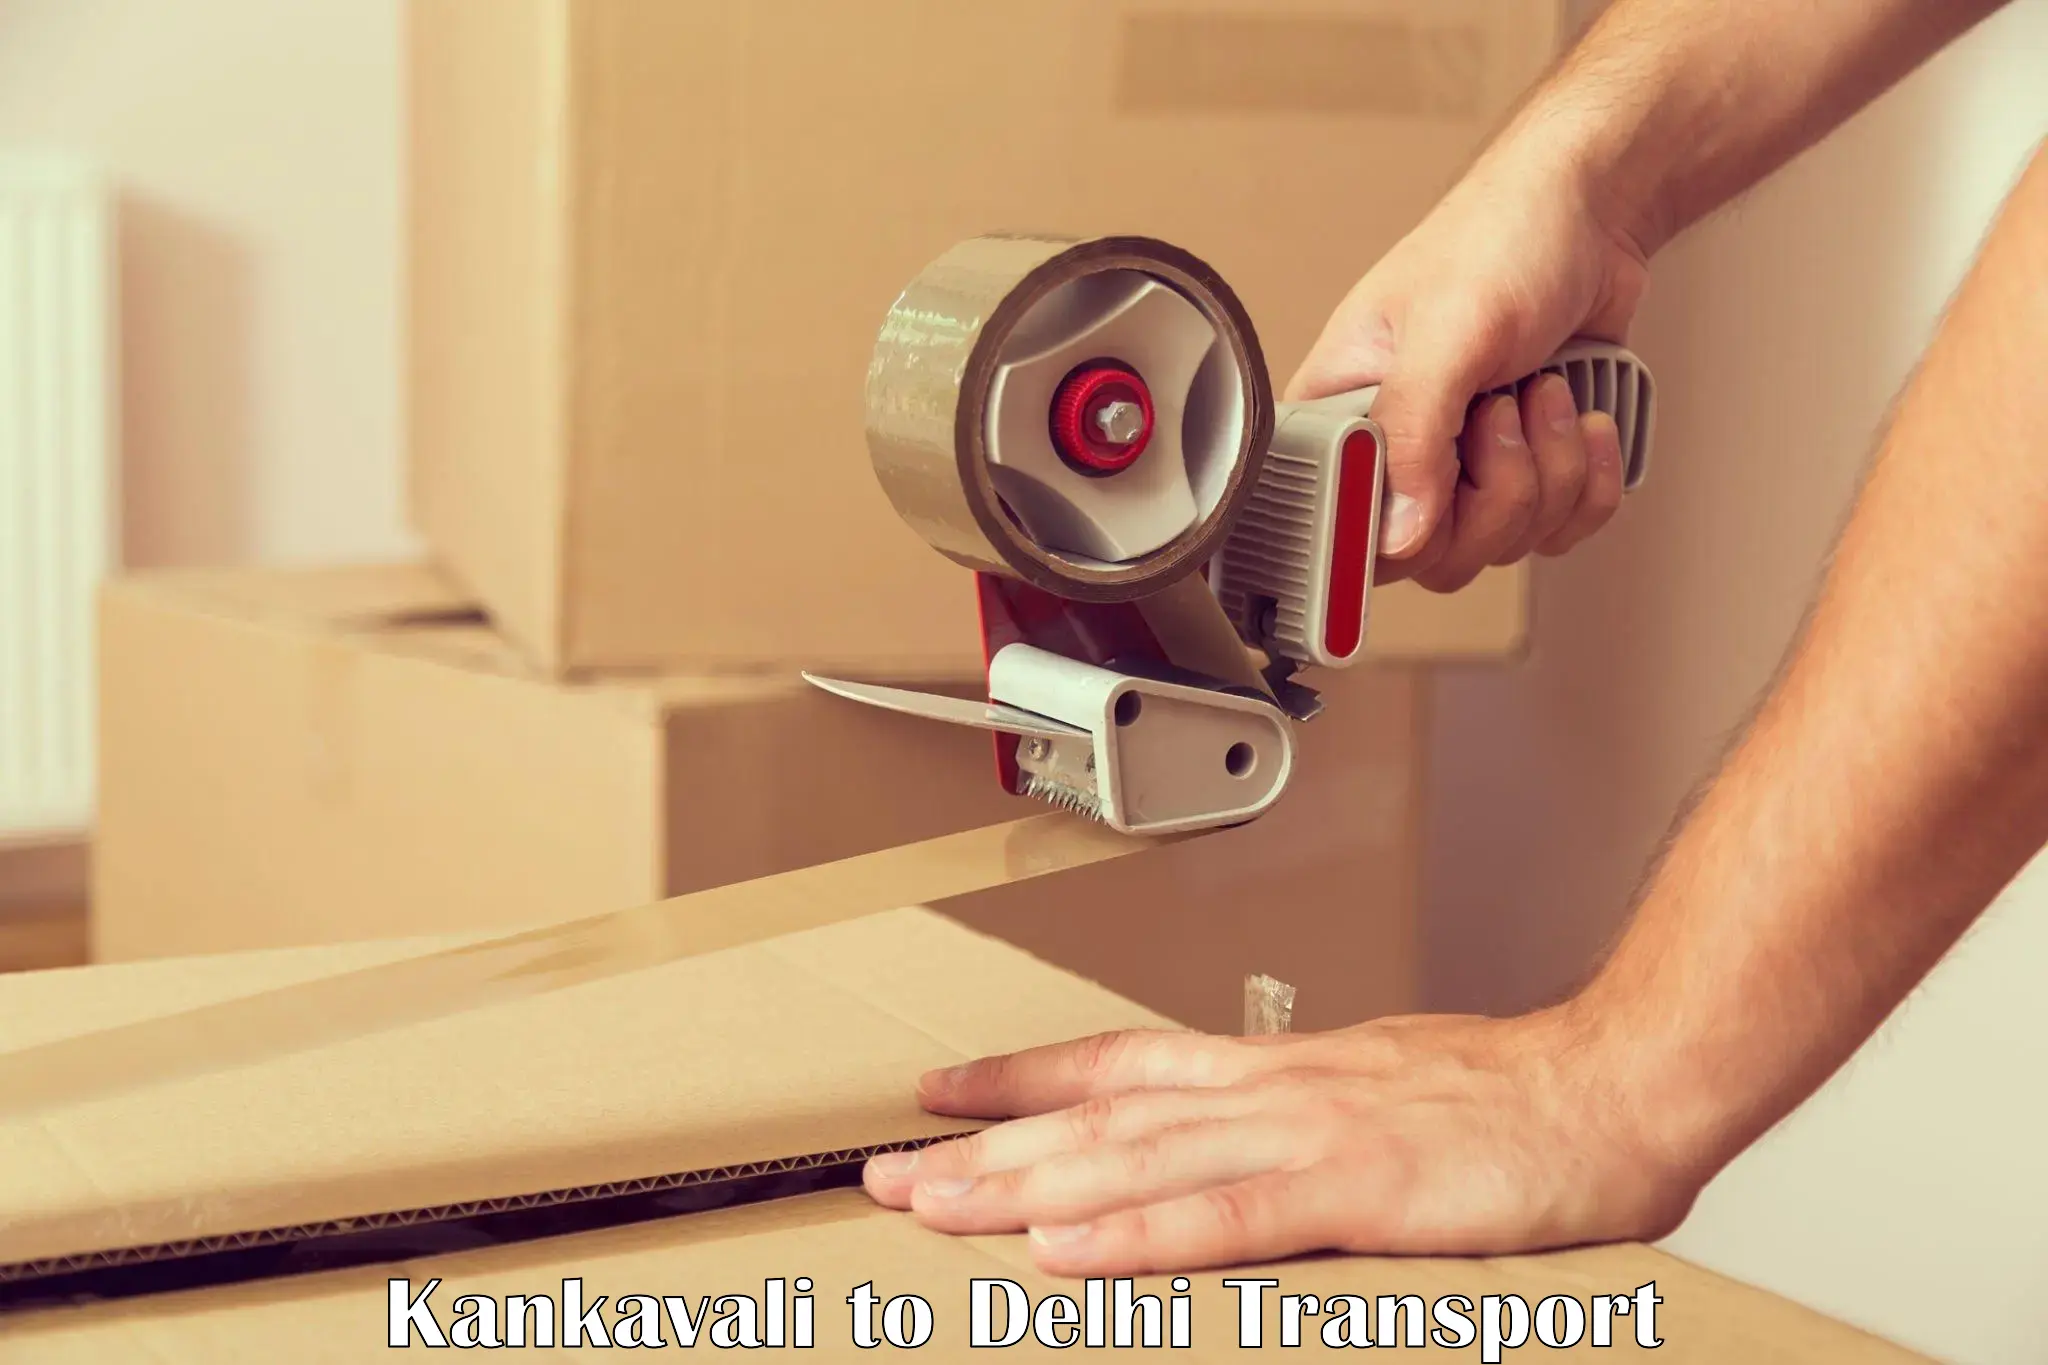 Truck transport companies in India Kankavali to Lodhi Road